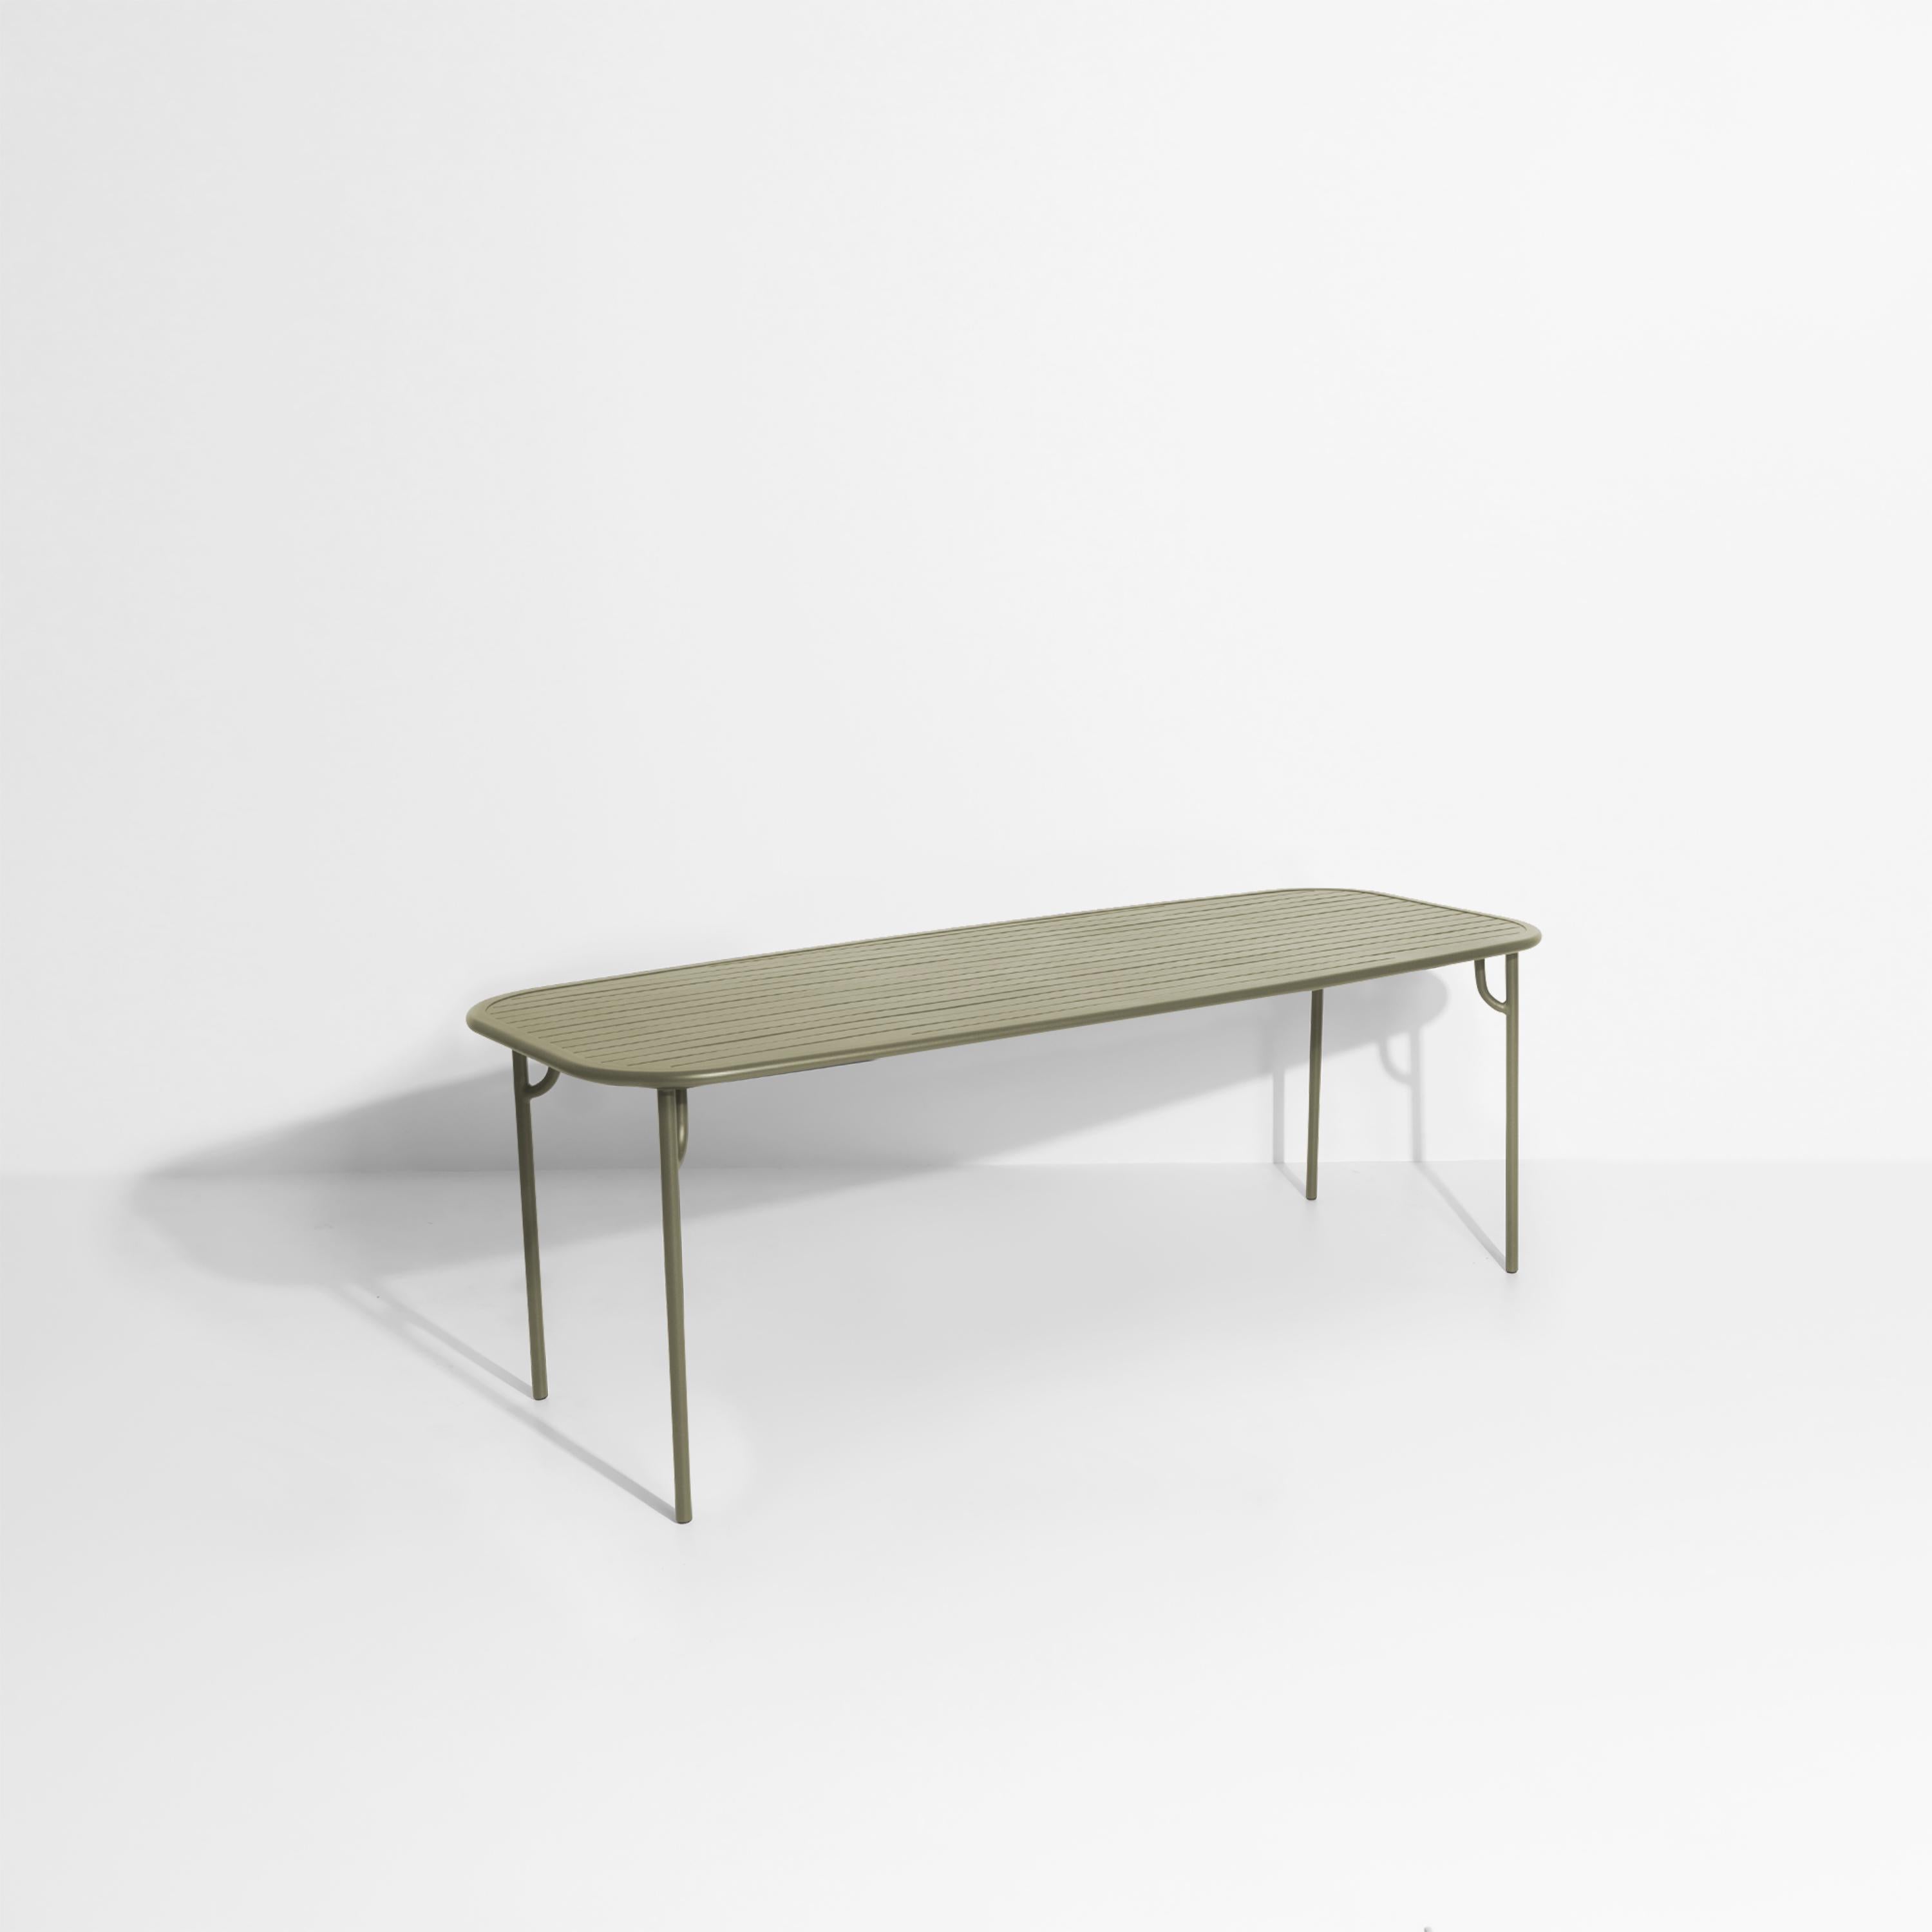 Petite Friture Week-End Large Rectangular Dining Table in Jade Green Aluminium with Slats by Studio BrichetZiegler, 2017

The week-end collection is a full range of outdoor furniture, in aluminium grained epoxy paint, matt finish, that includes 18